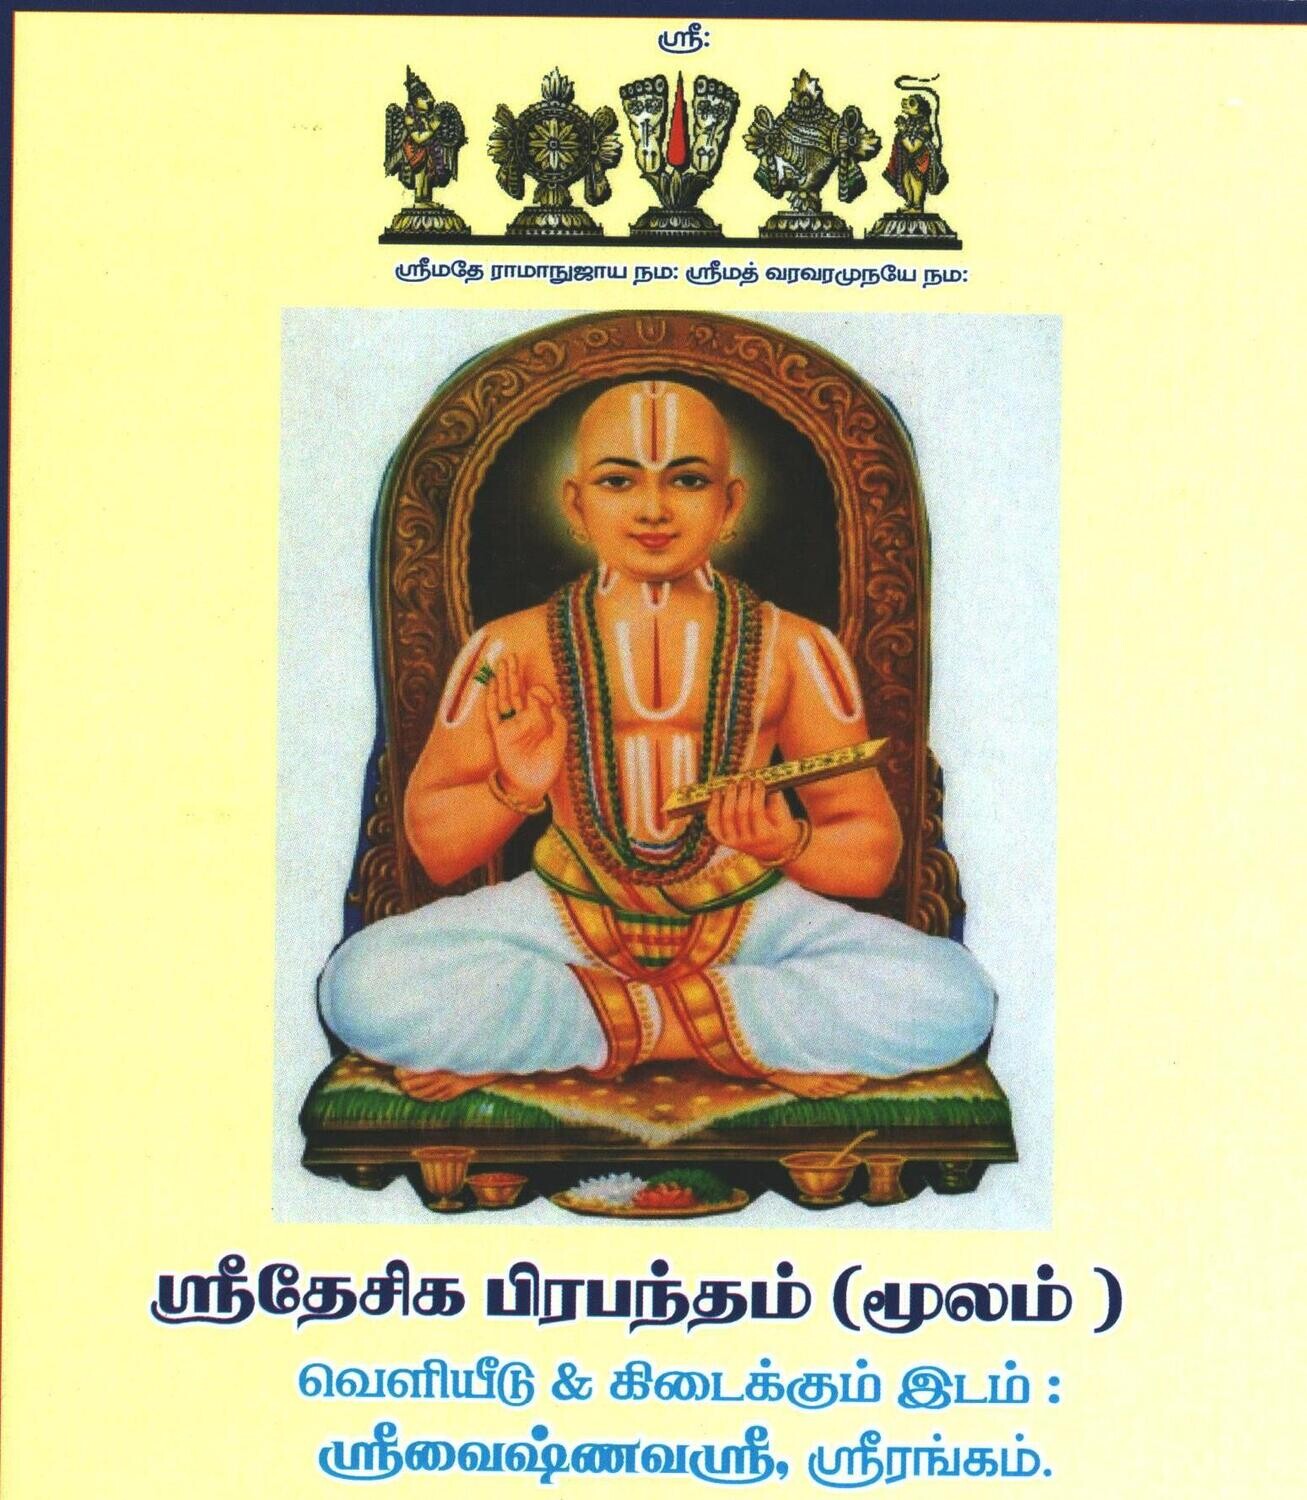 Combo pack - Big lettered Sri Desika Stotram ( with numbering) and Desika Prabandham .A4 size book